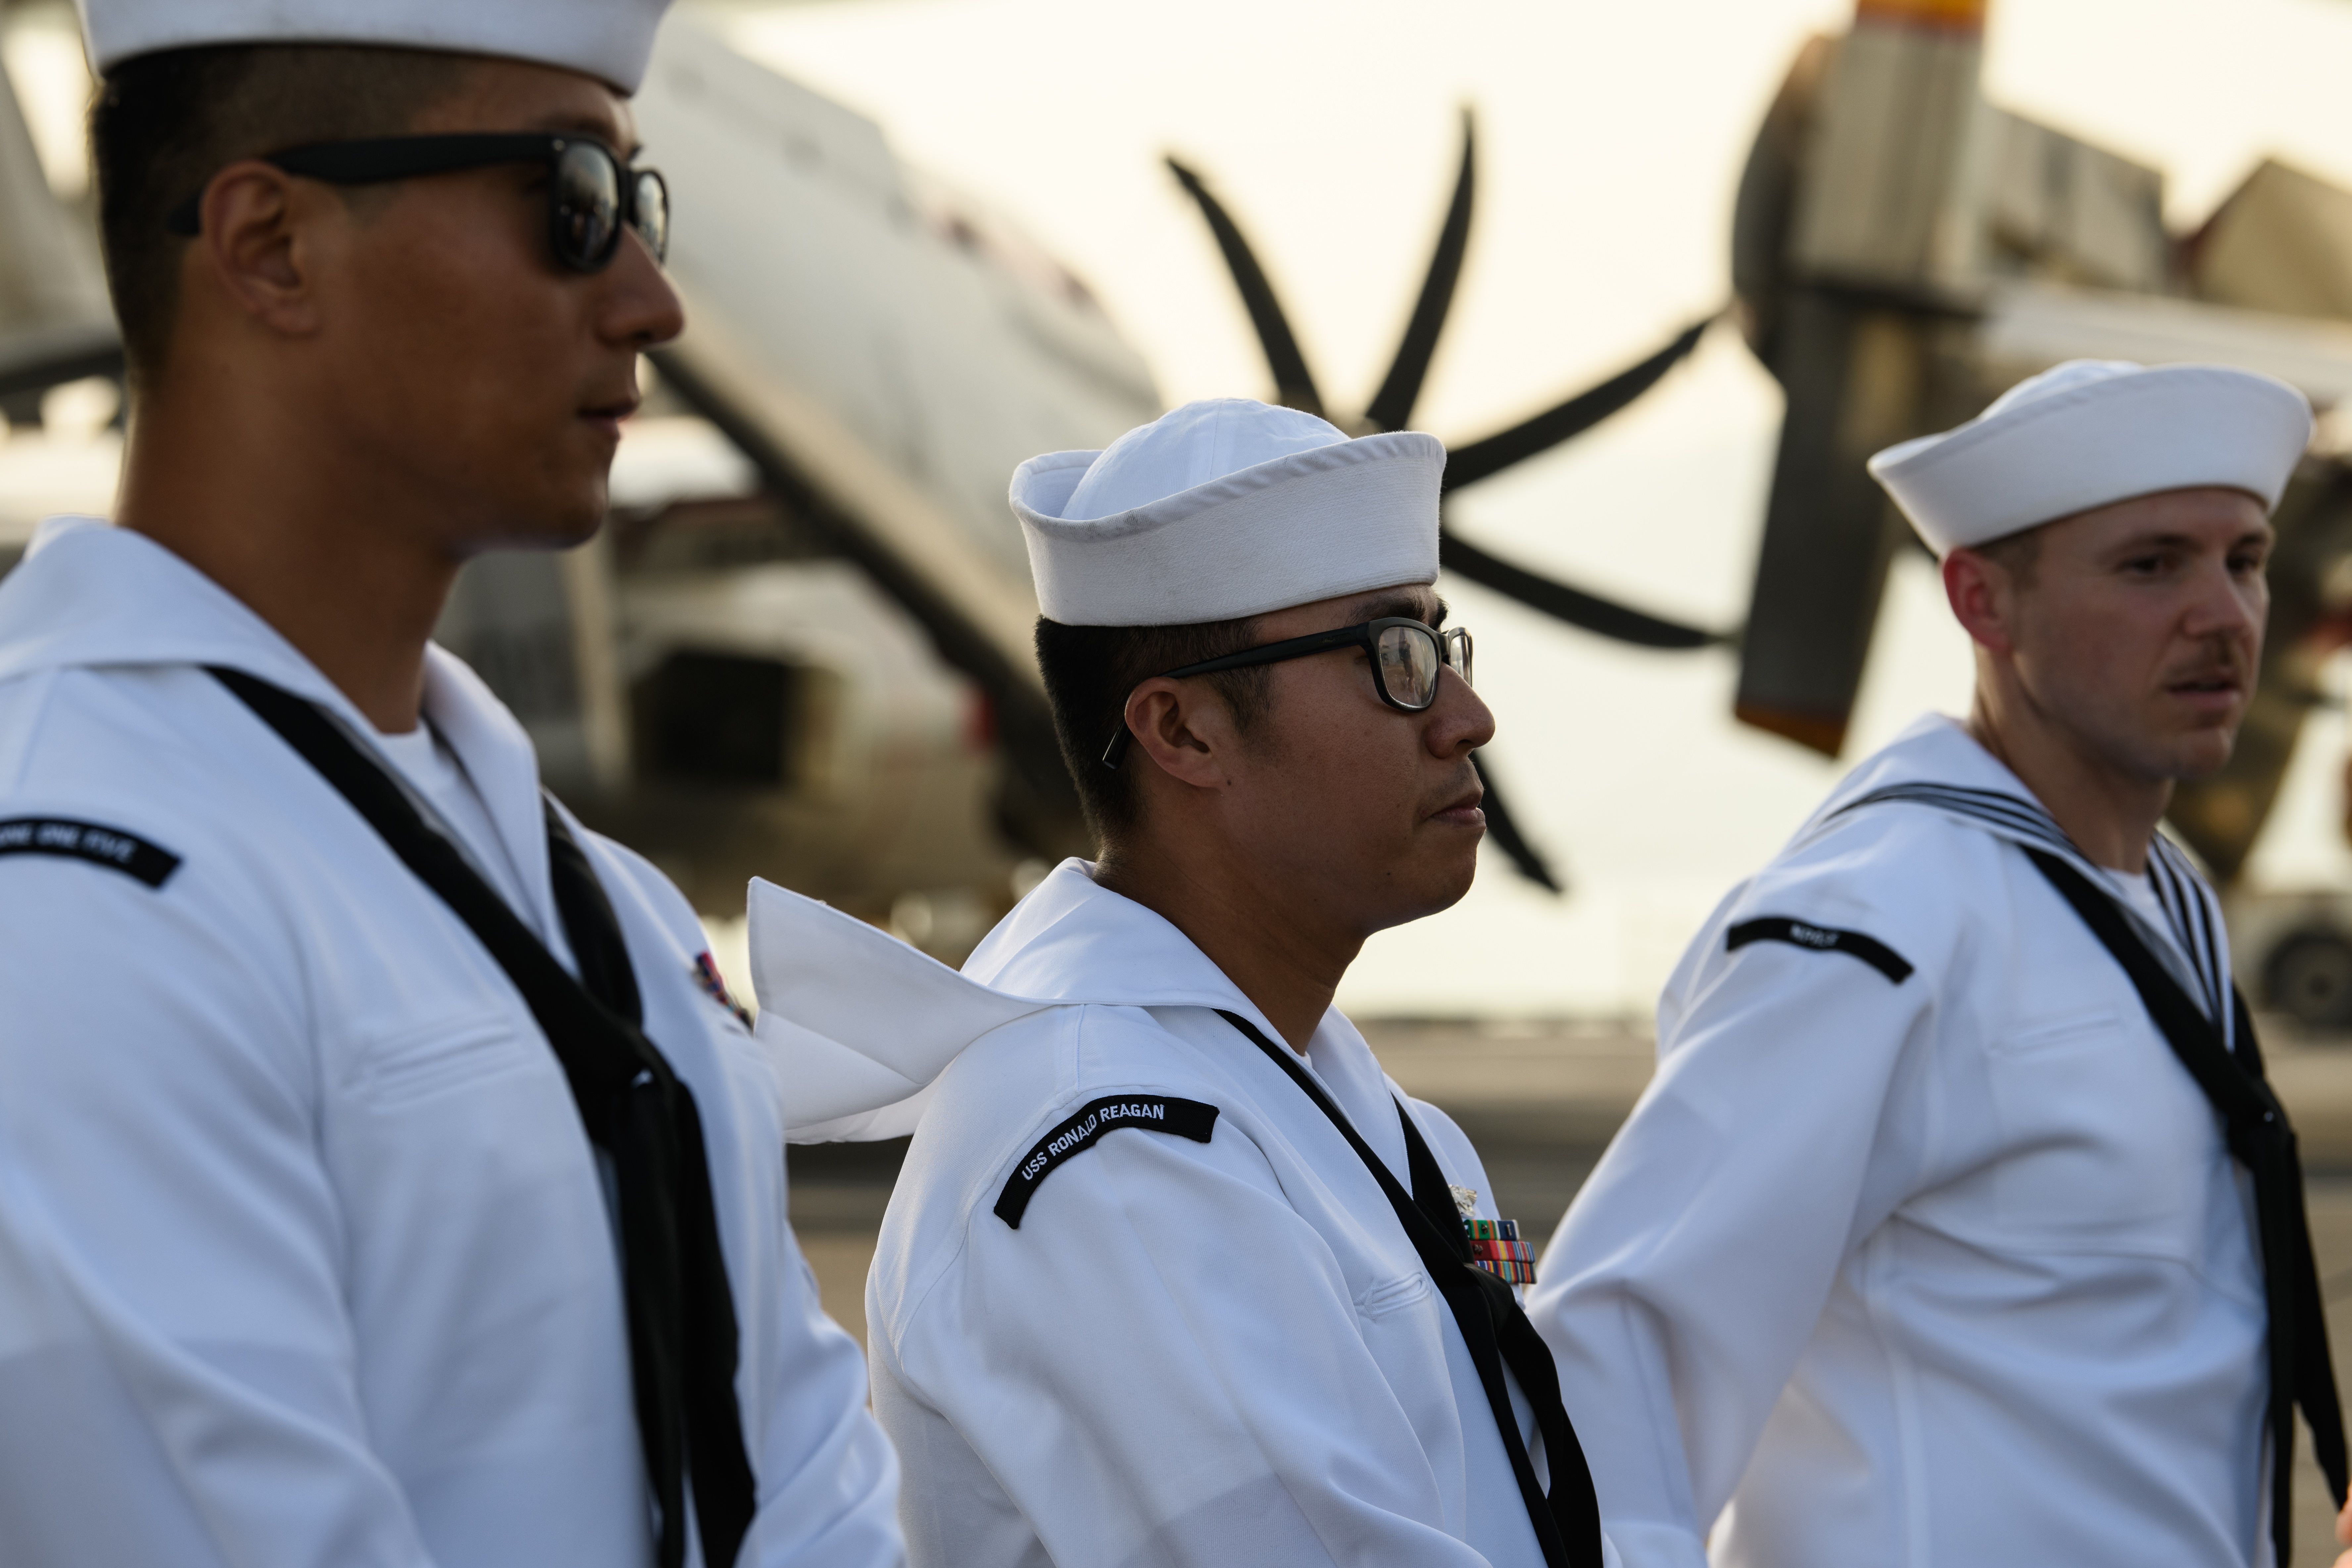 Sailors on board the US Navy's USS Ronald Reagan (CVN-76) aircraft carrier are seen on the flight deck during a port visit in Hong Kong on November 21, 2018. (ANTHONY WALLACE/AFP/Getty Images)